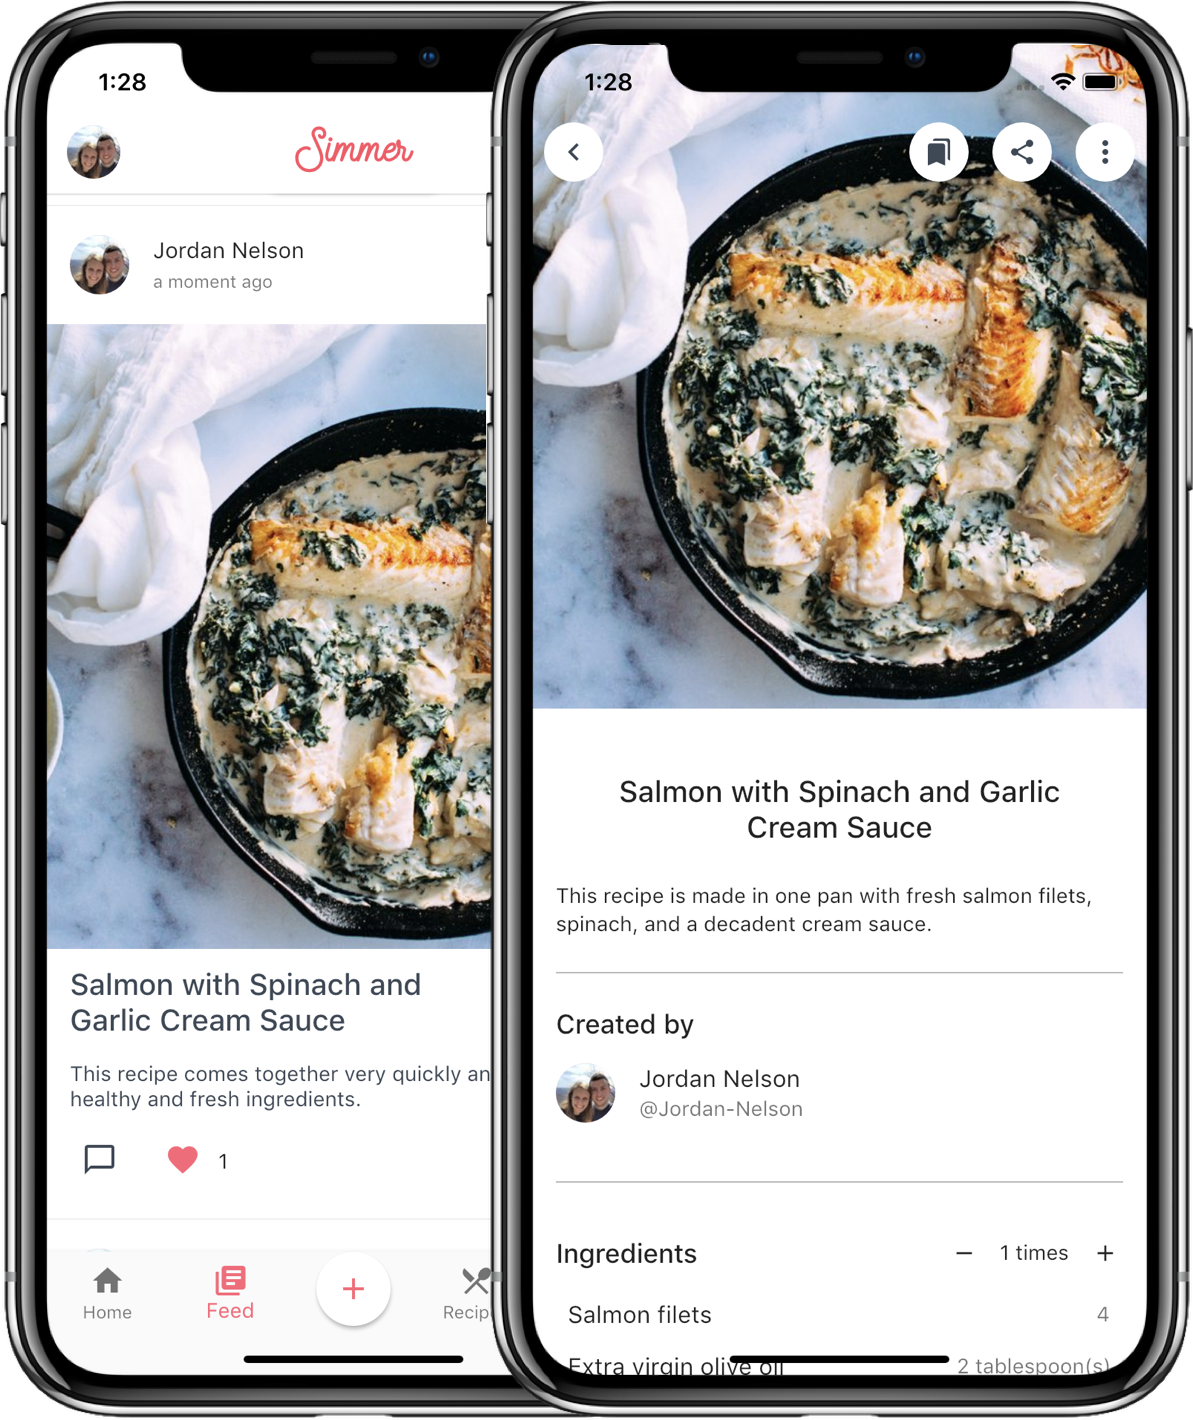 Screenshot of the social news feed and a recipe view